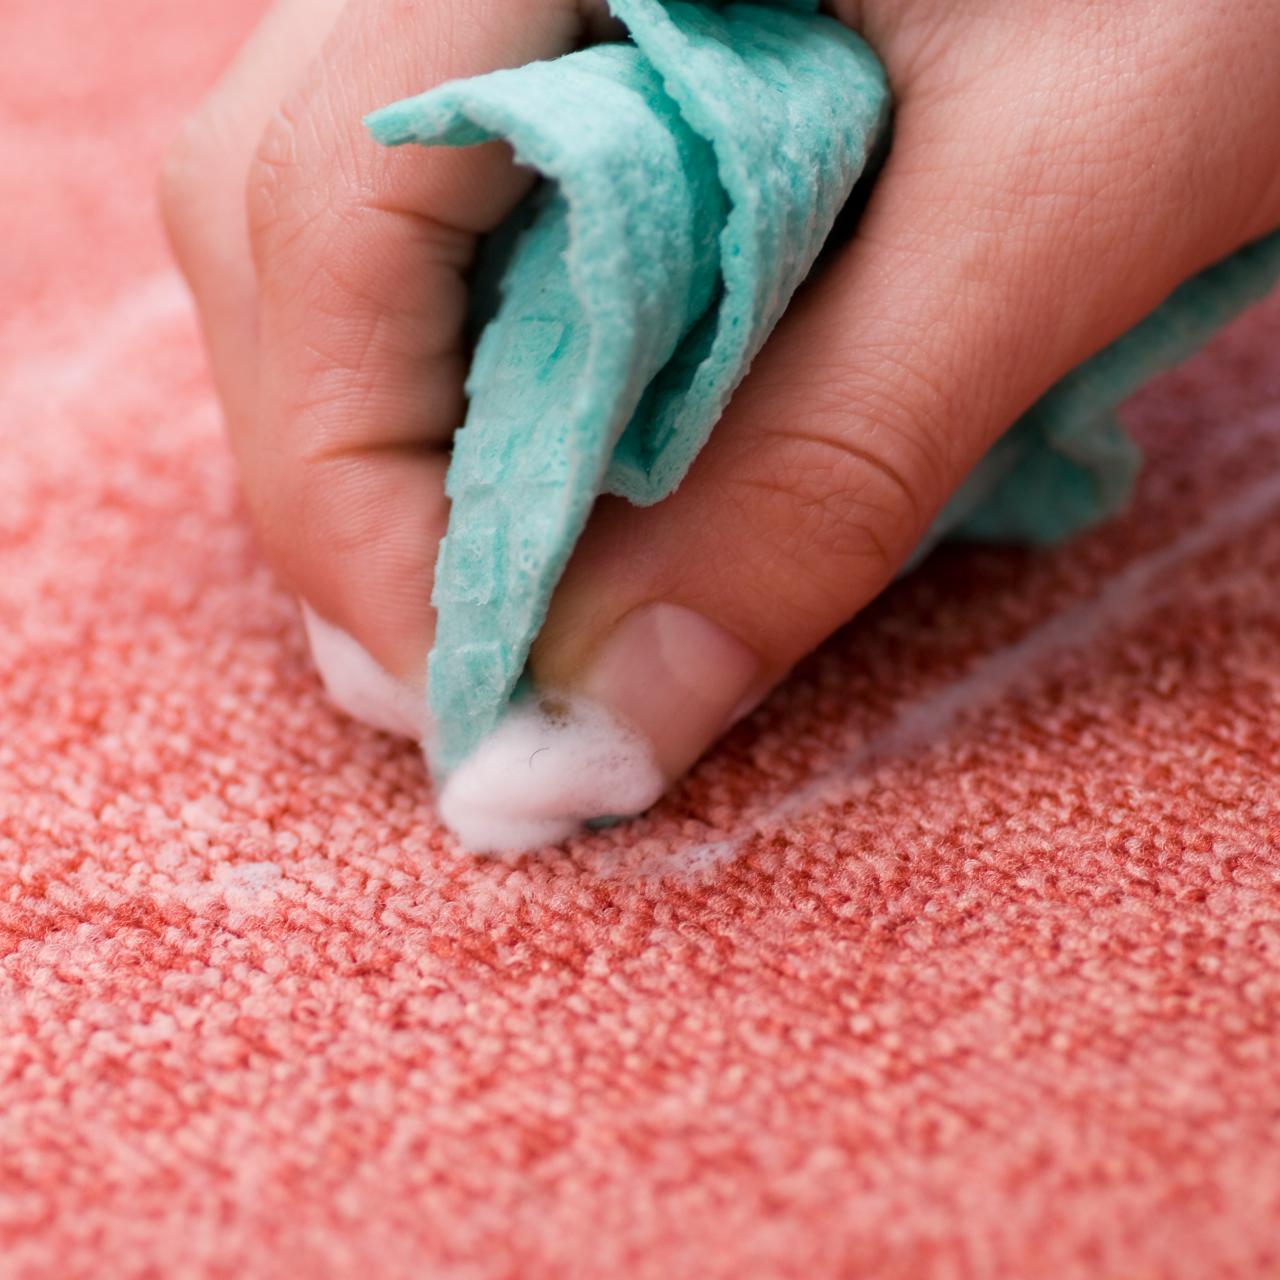 how often should you clean your carpets